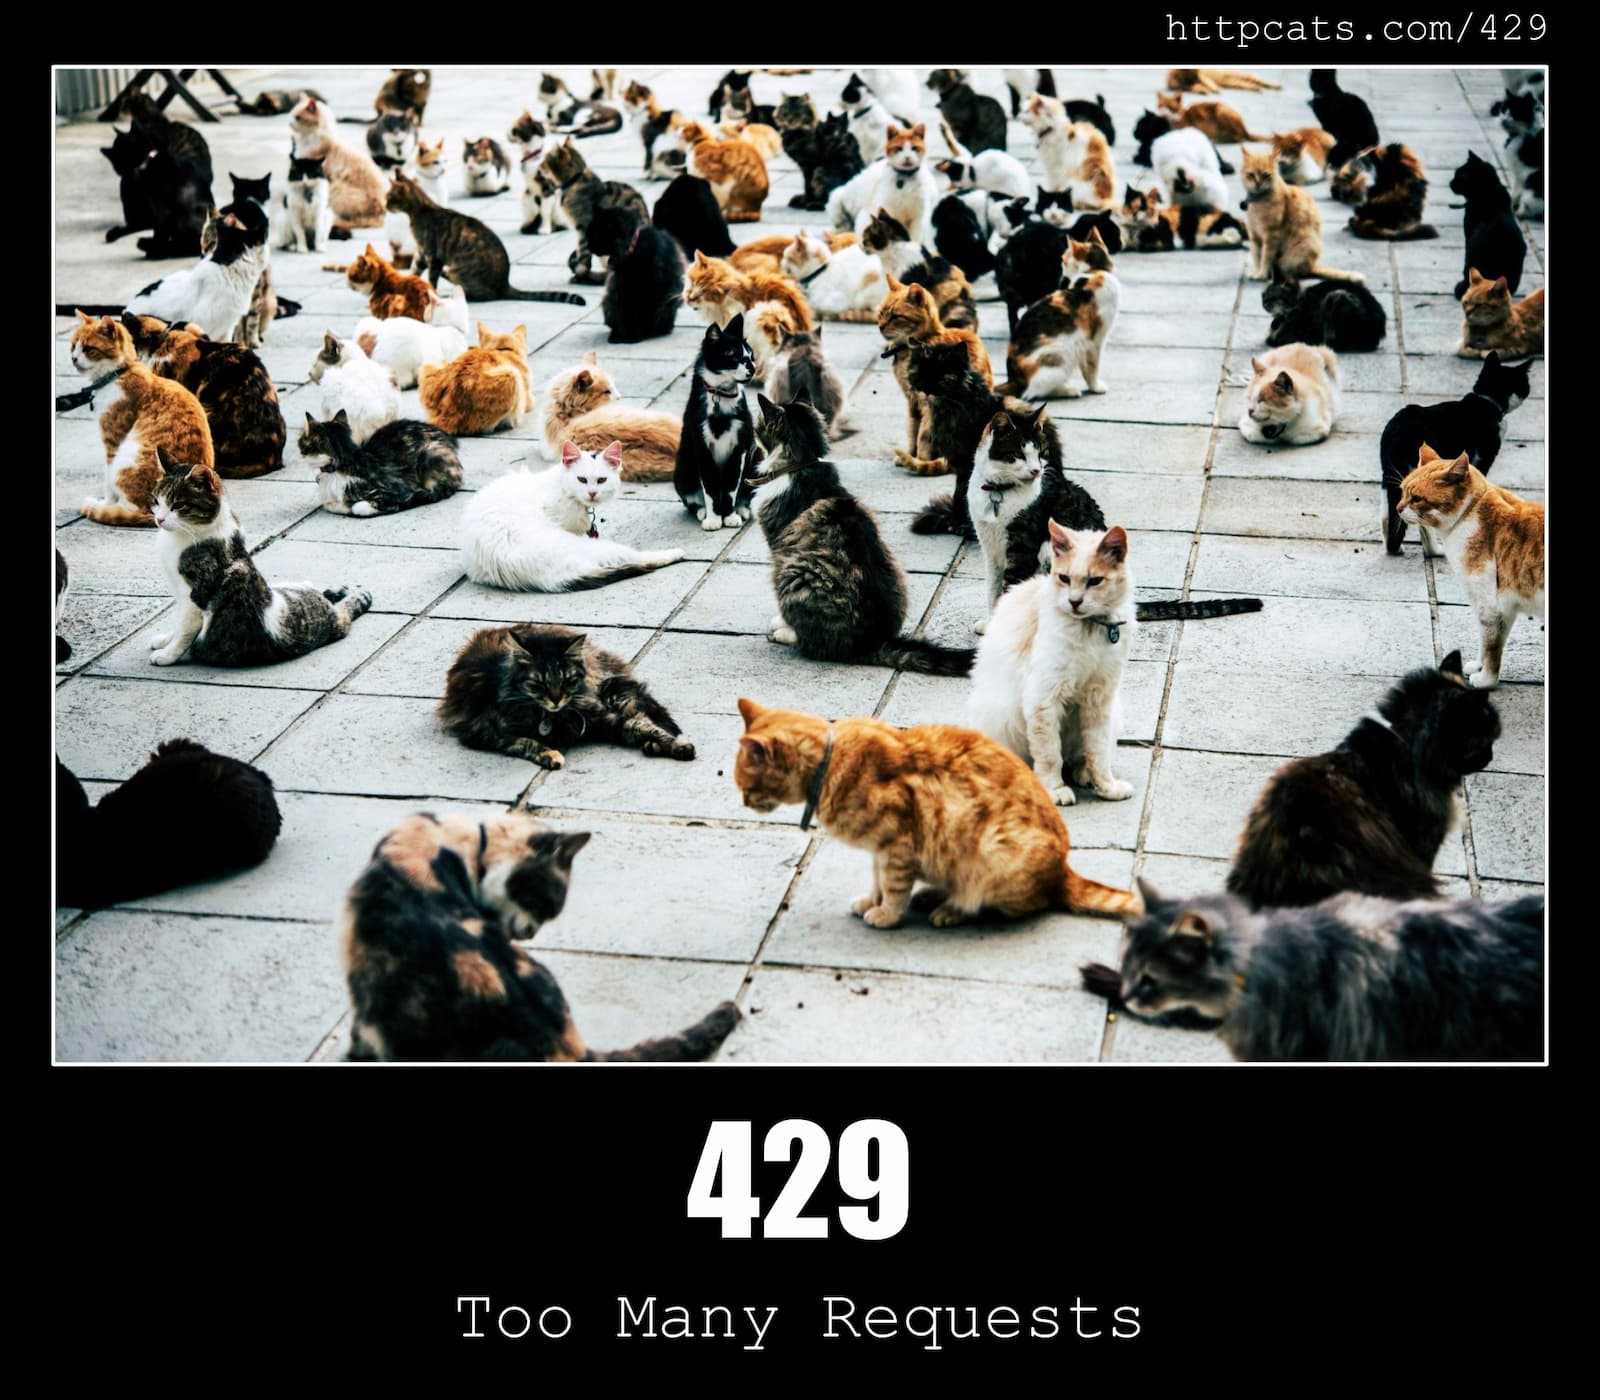 429 Too Many Requests - HTTP status code and cats!